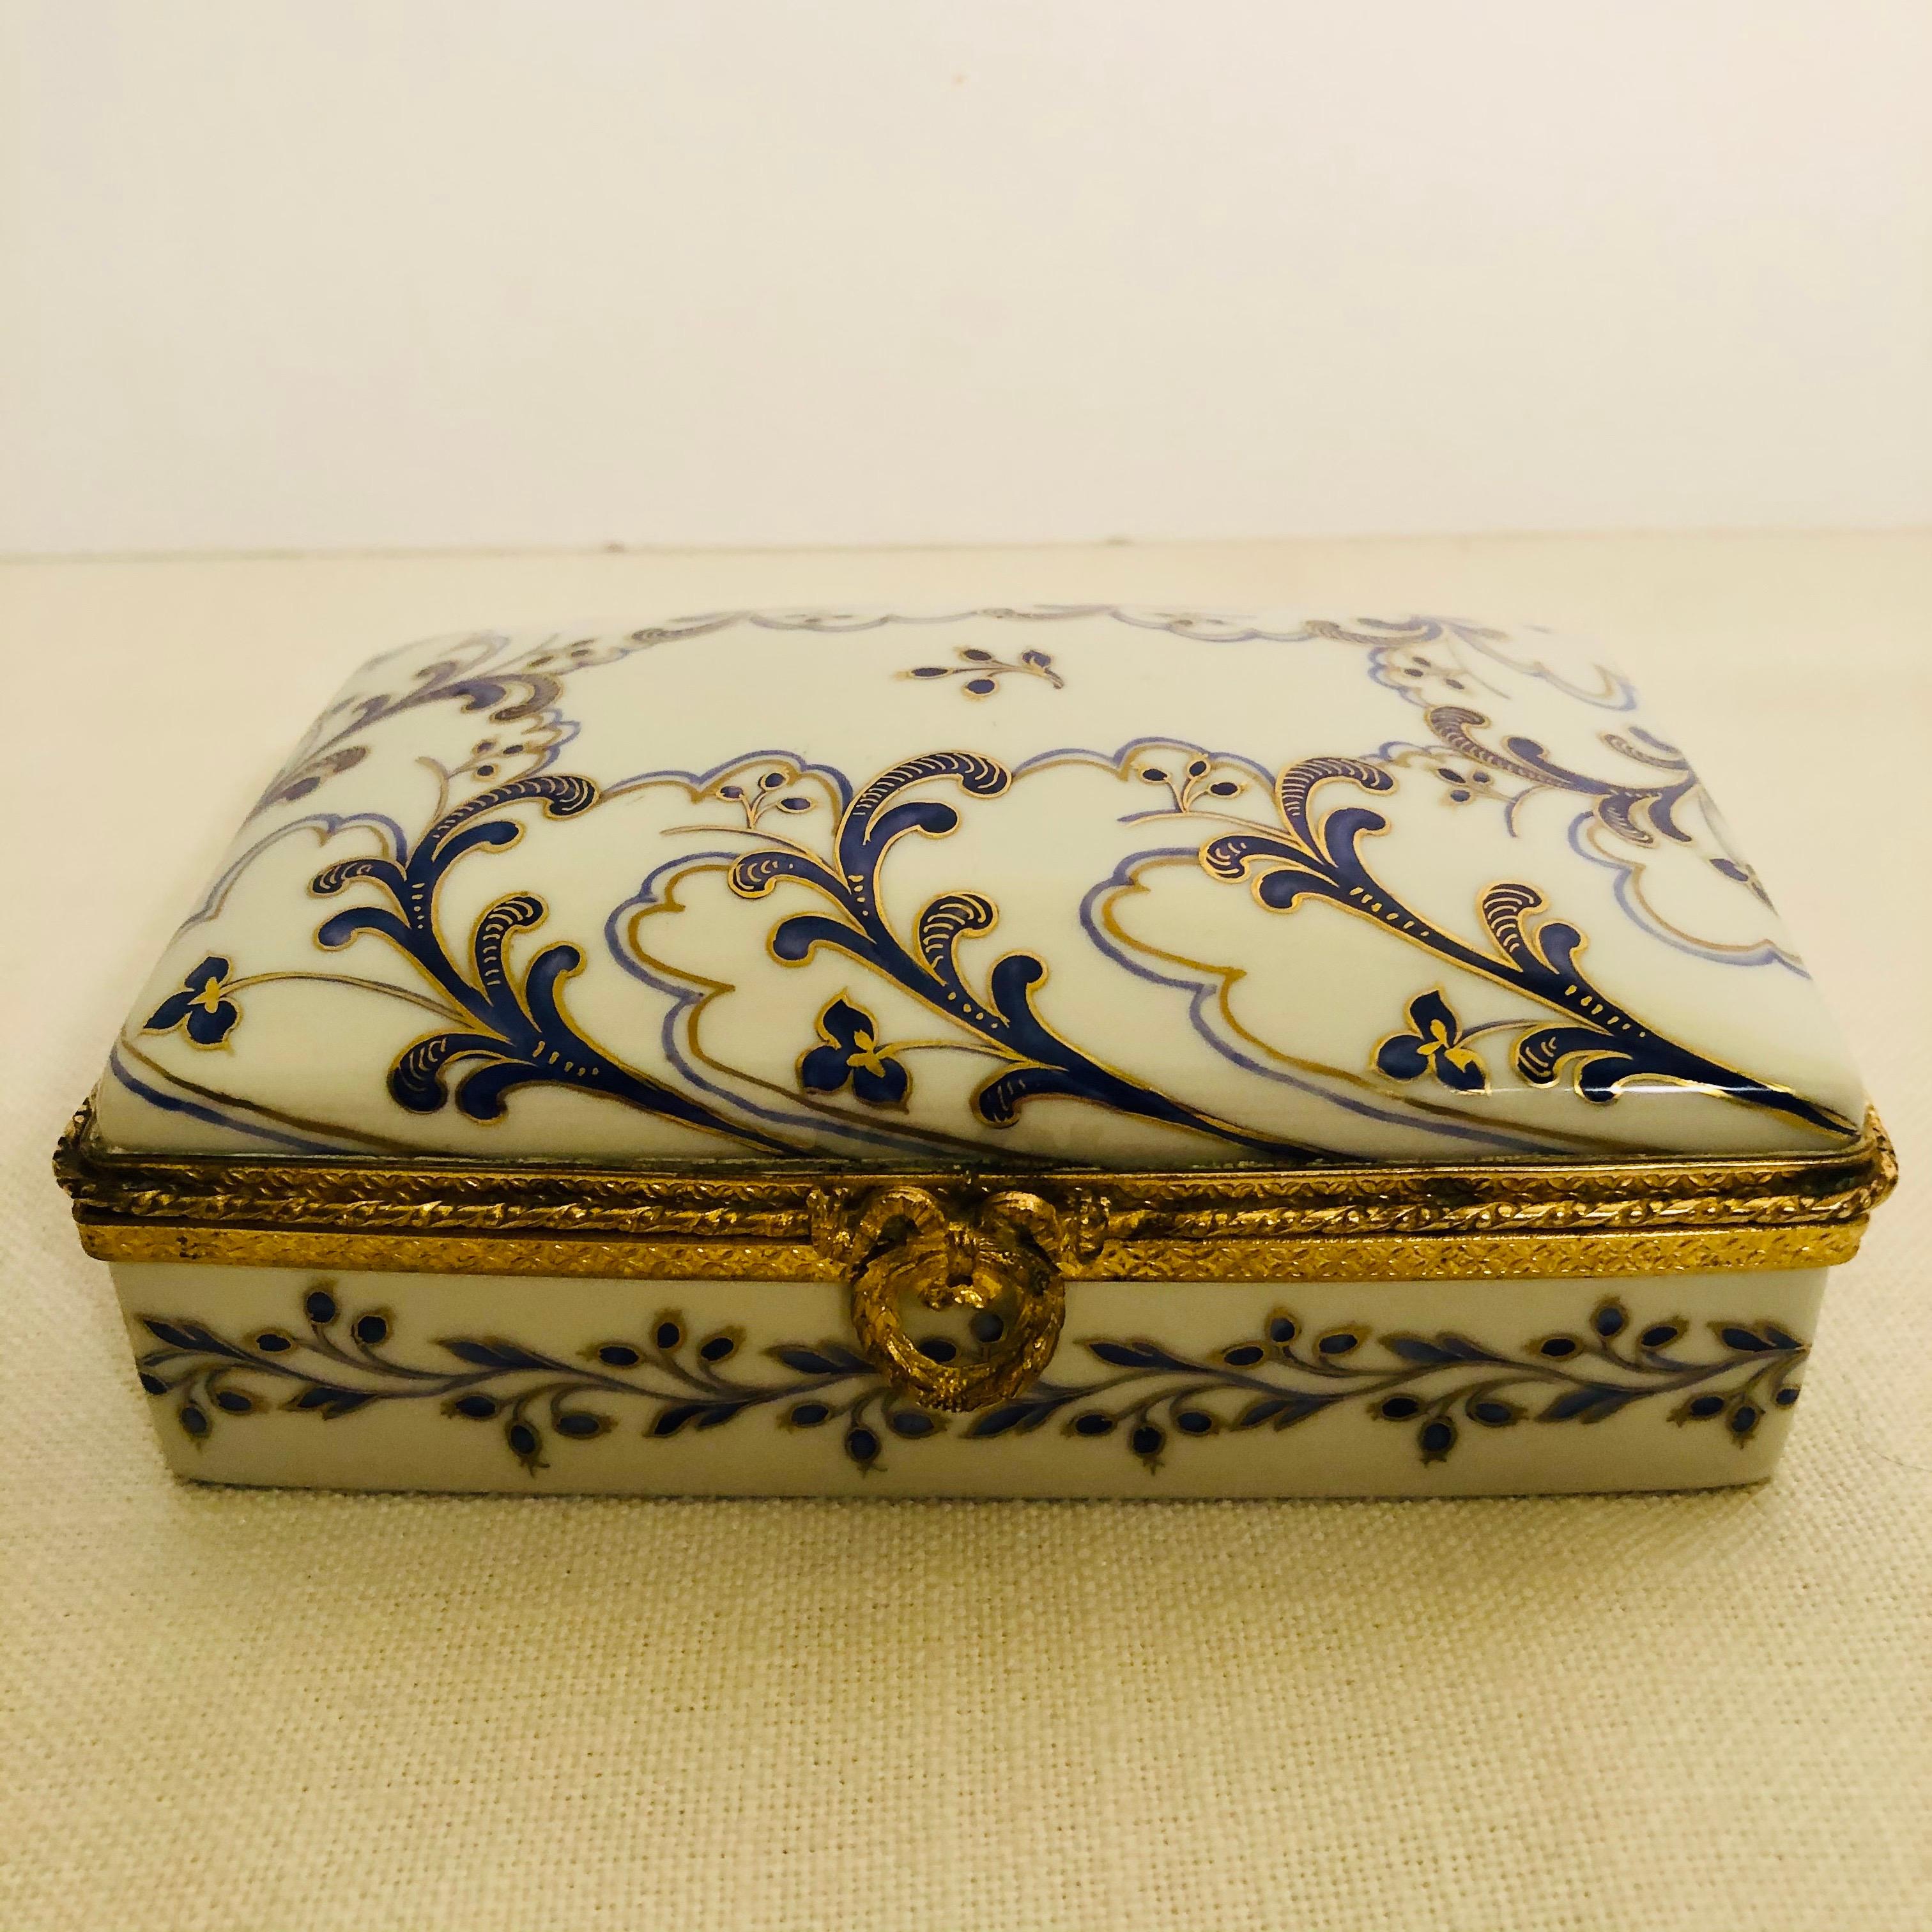 I want to offer you this beautiful Le Tallec porcelain box which is hand-painted with cobalt and gold arabesque decoration on a white ground. This Le Tallec box would be a special addition to anyone who collects porcelain boxes or for someone to use